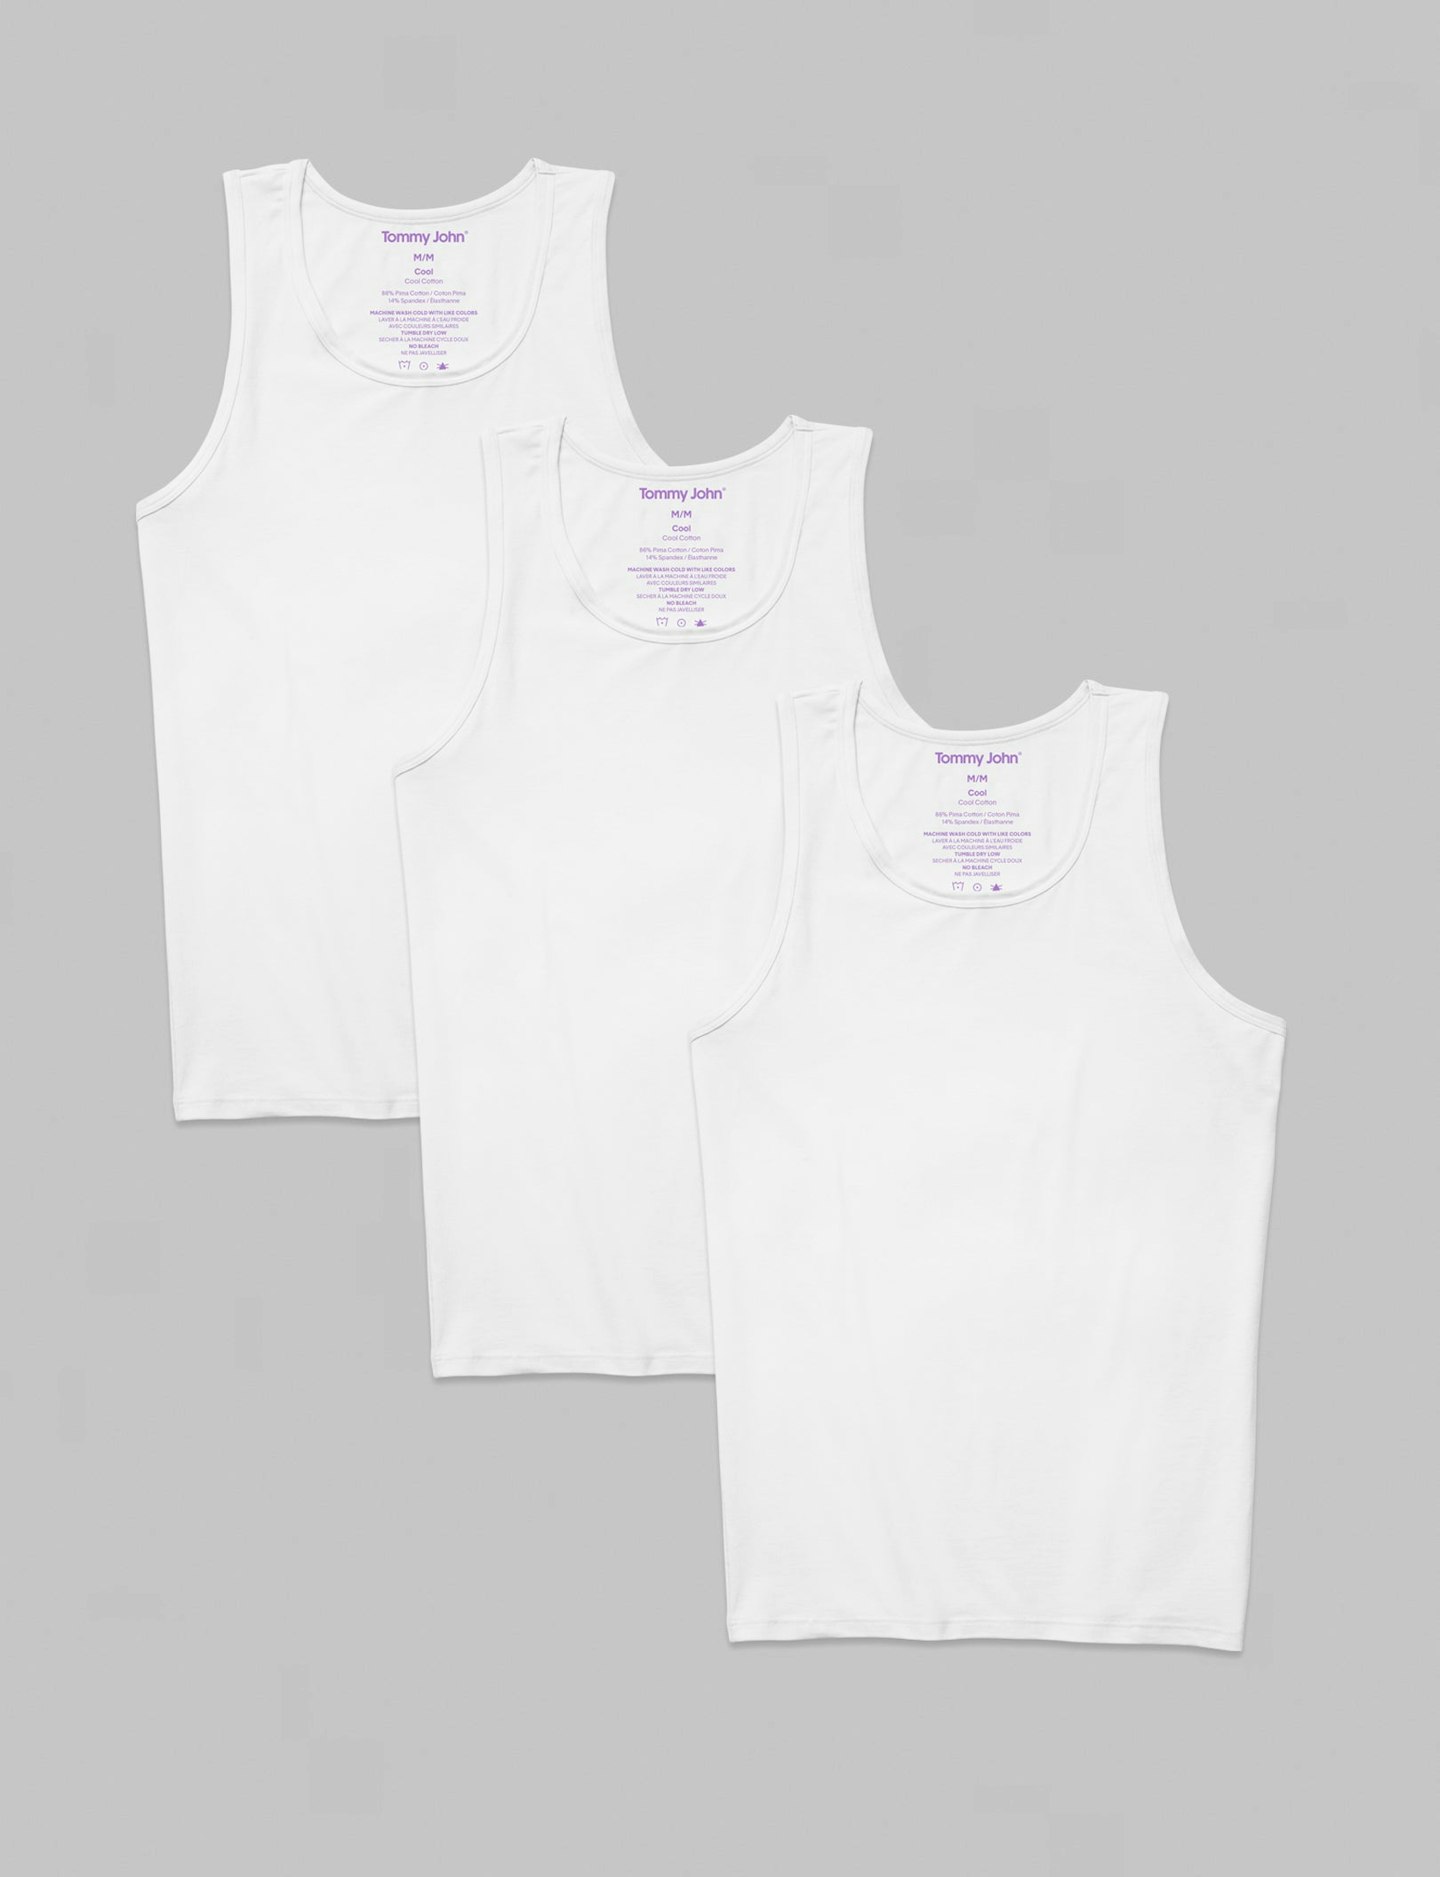 – Cool Tank Undershirt John (3-Pack) Cotton Stay-Tucked Tommy